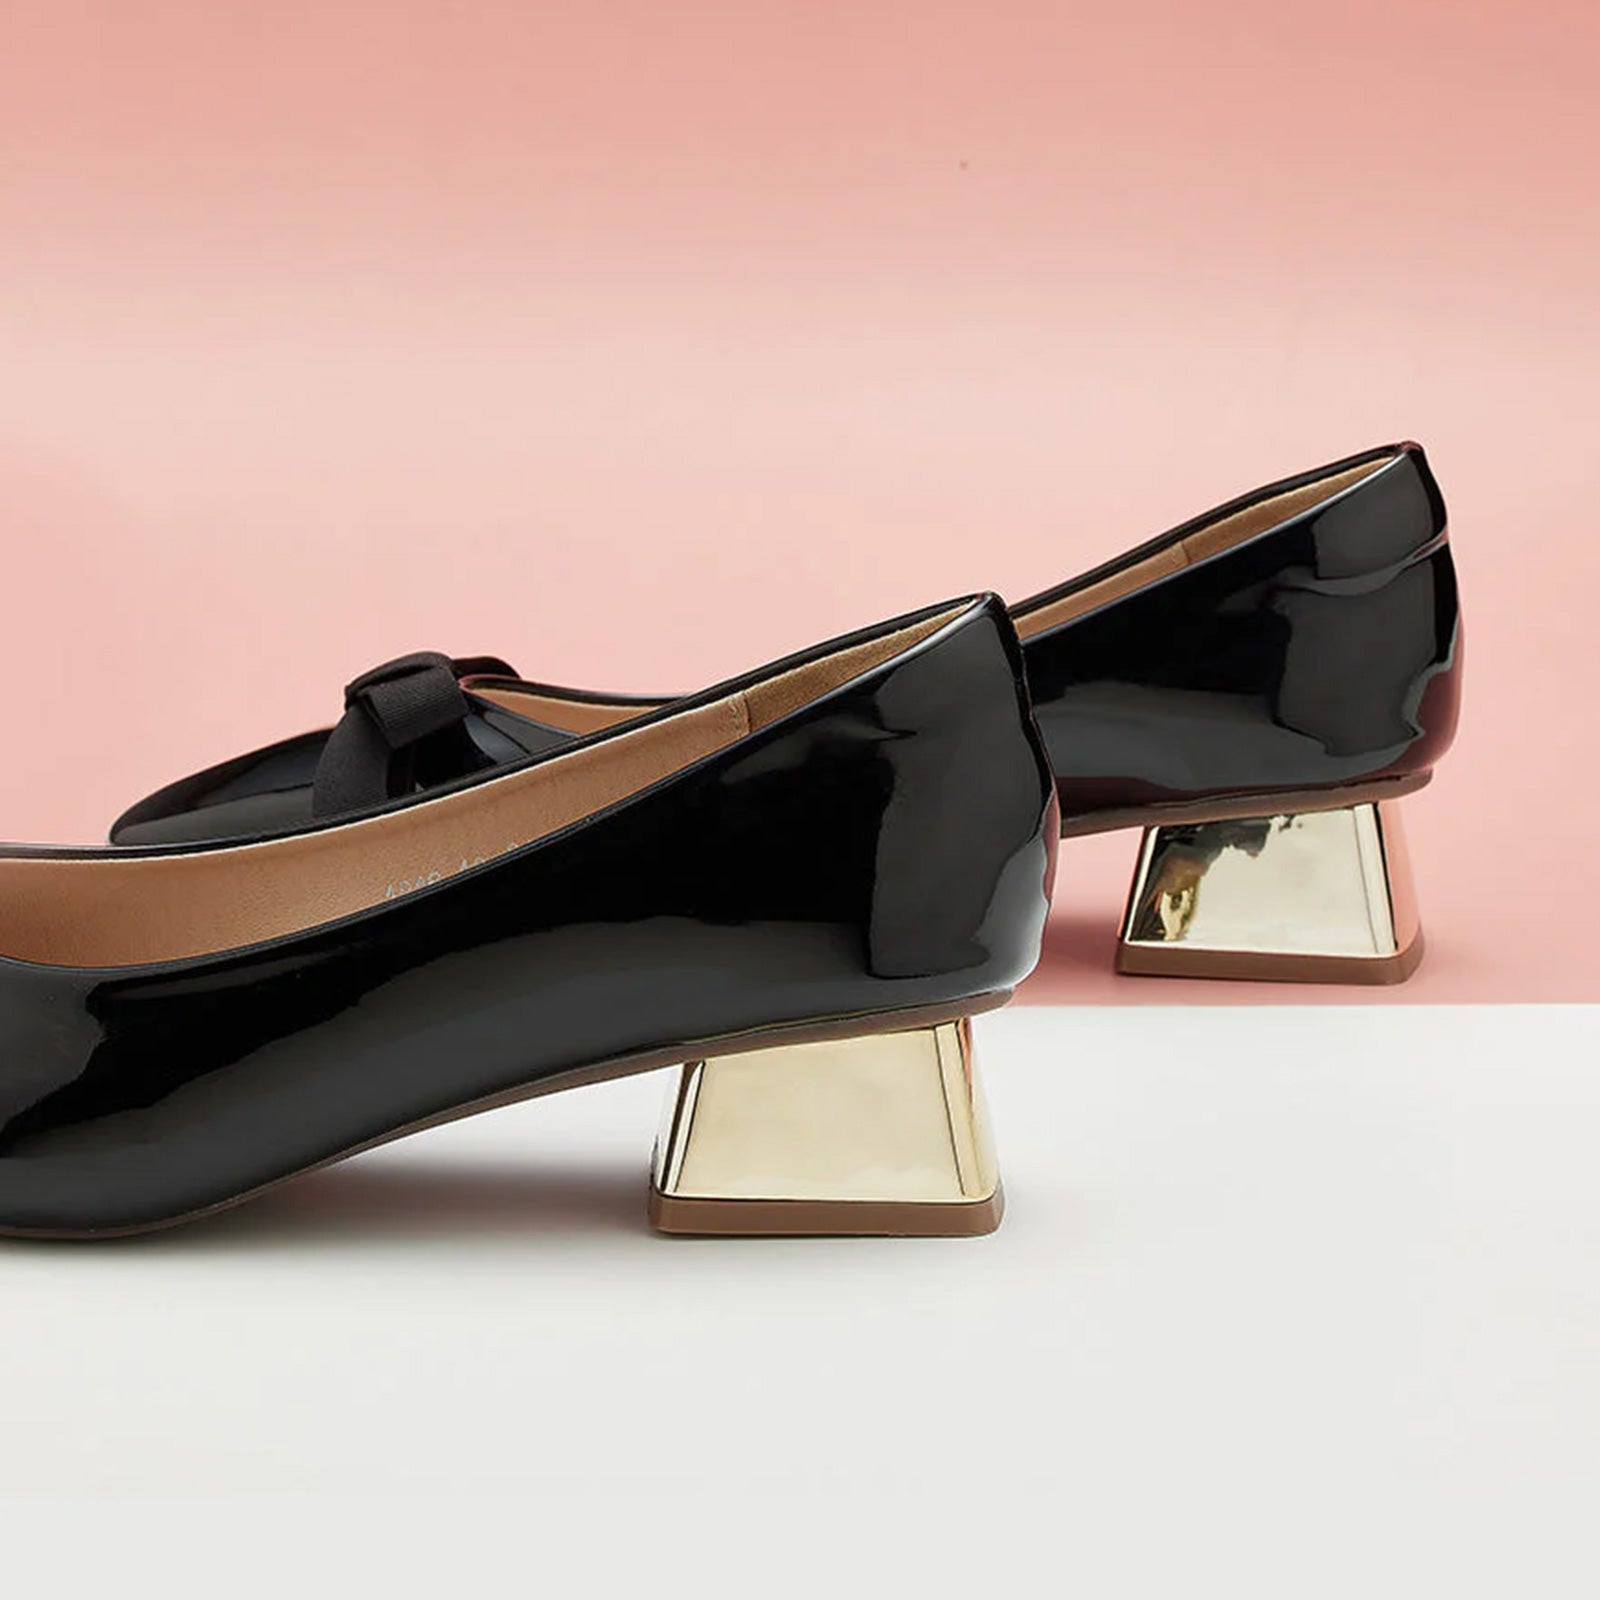 Block Heel Pumps in Black with patent leather, a minimalist and stylish addition to your footwear collection